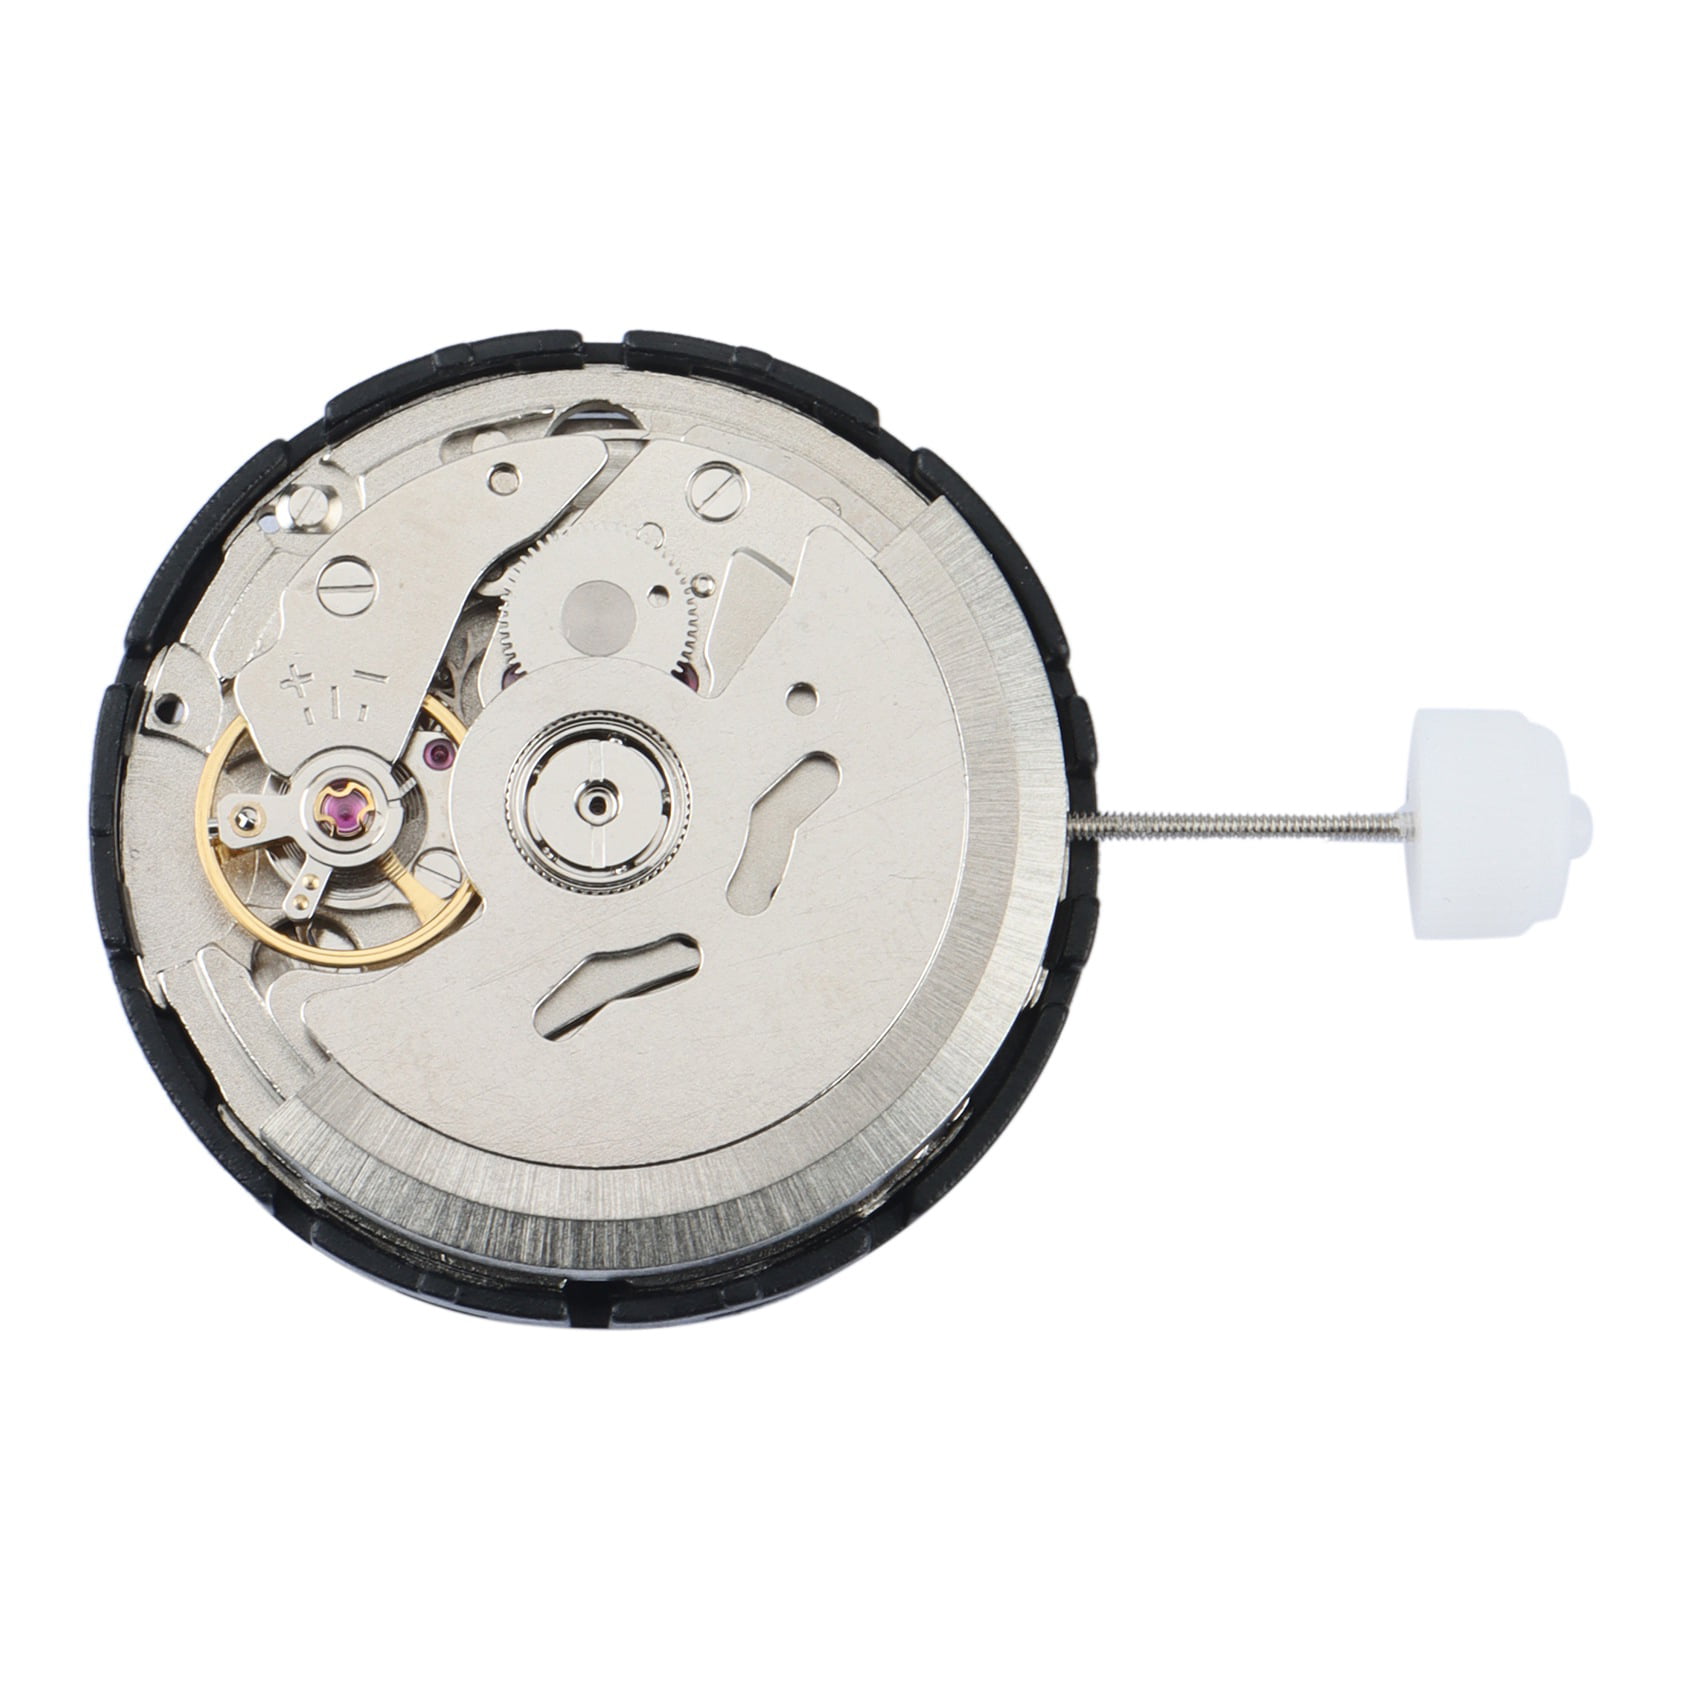 NH36 Accuracy Automatic Watch Movement Black/White Date Day Wheel ...